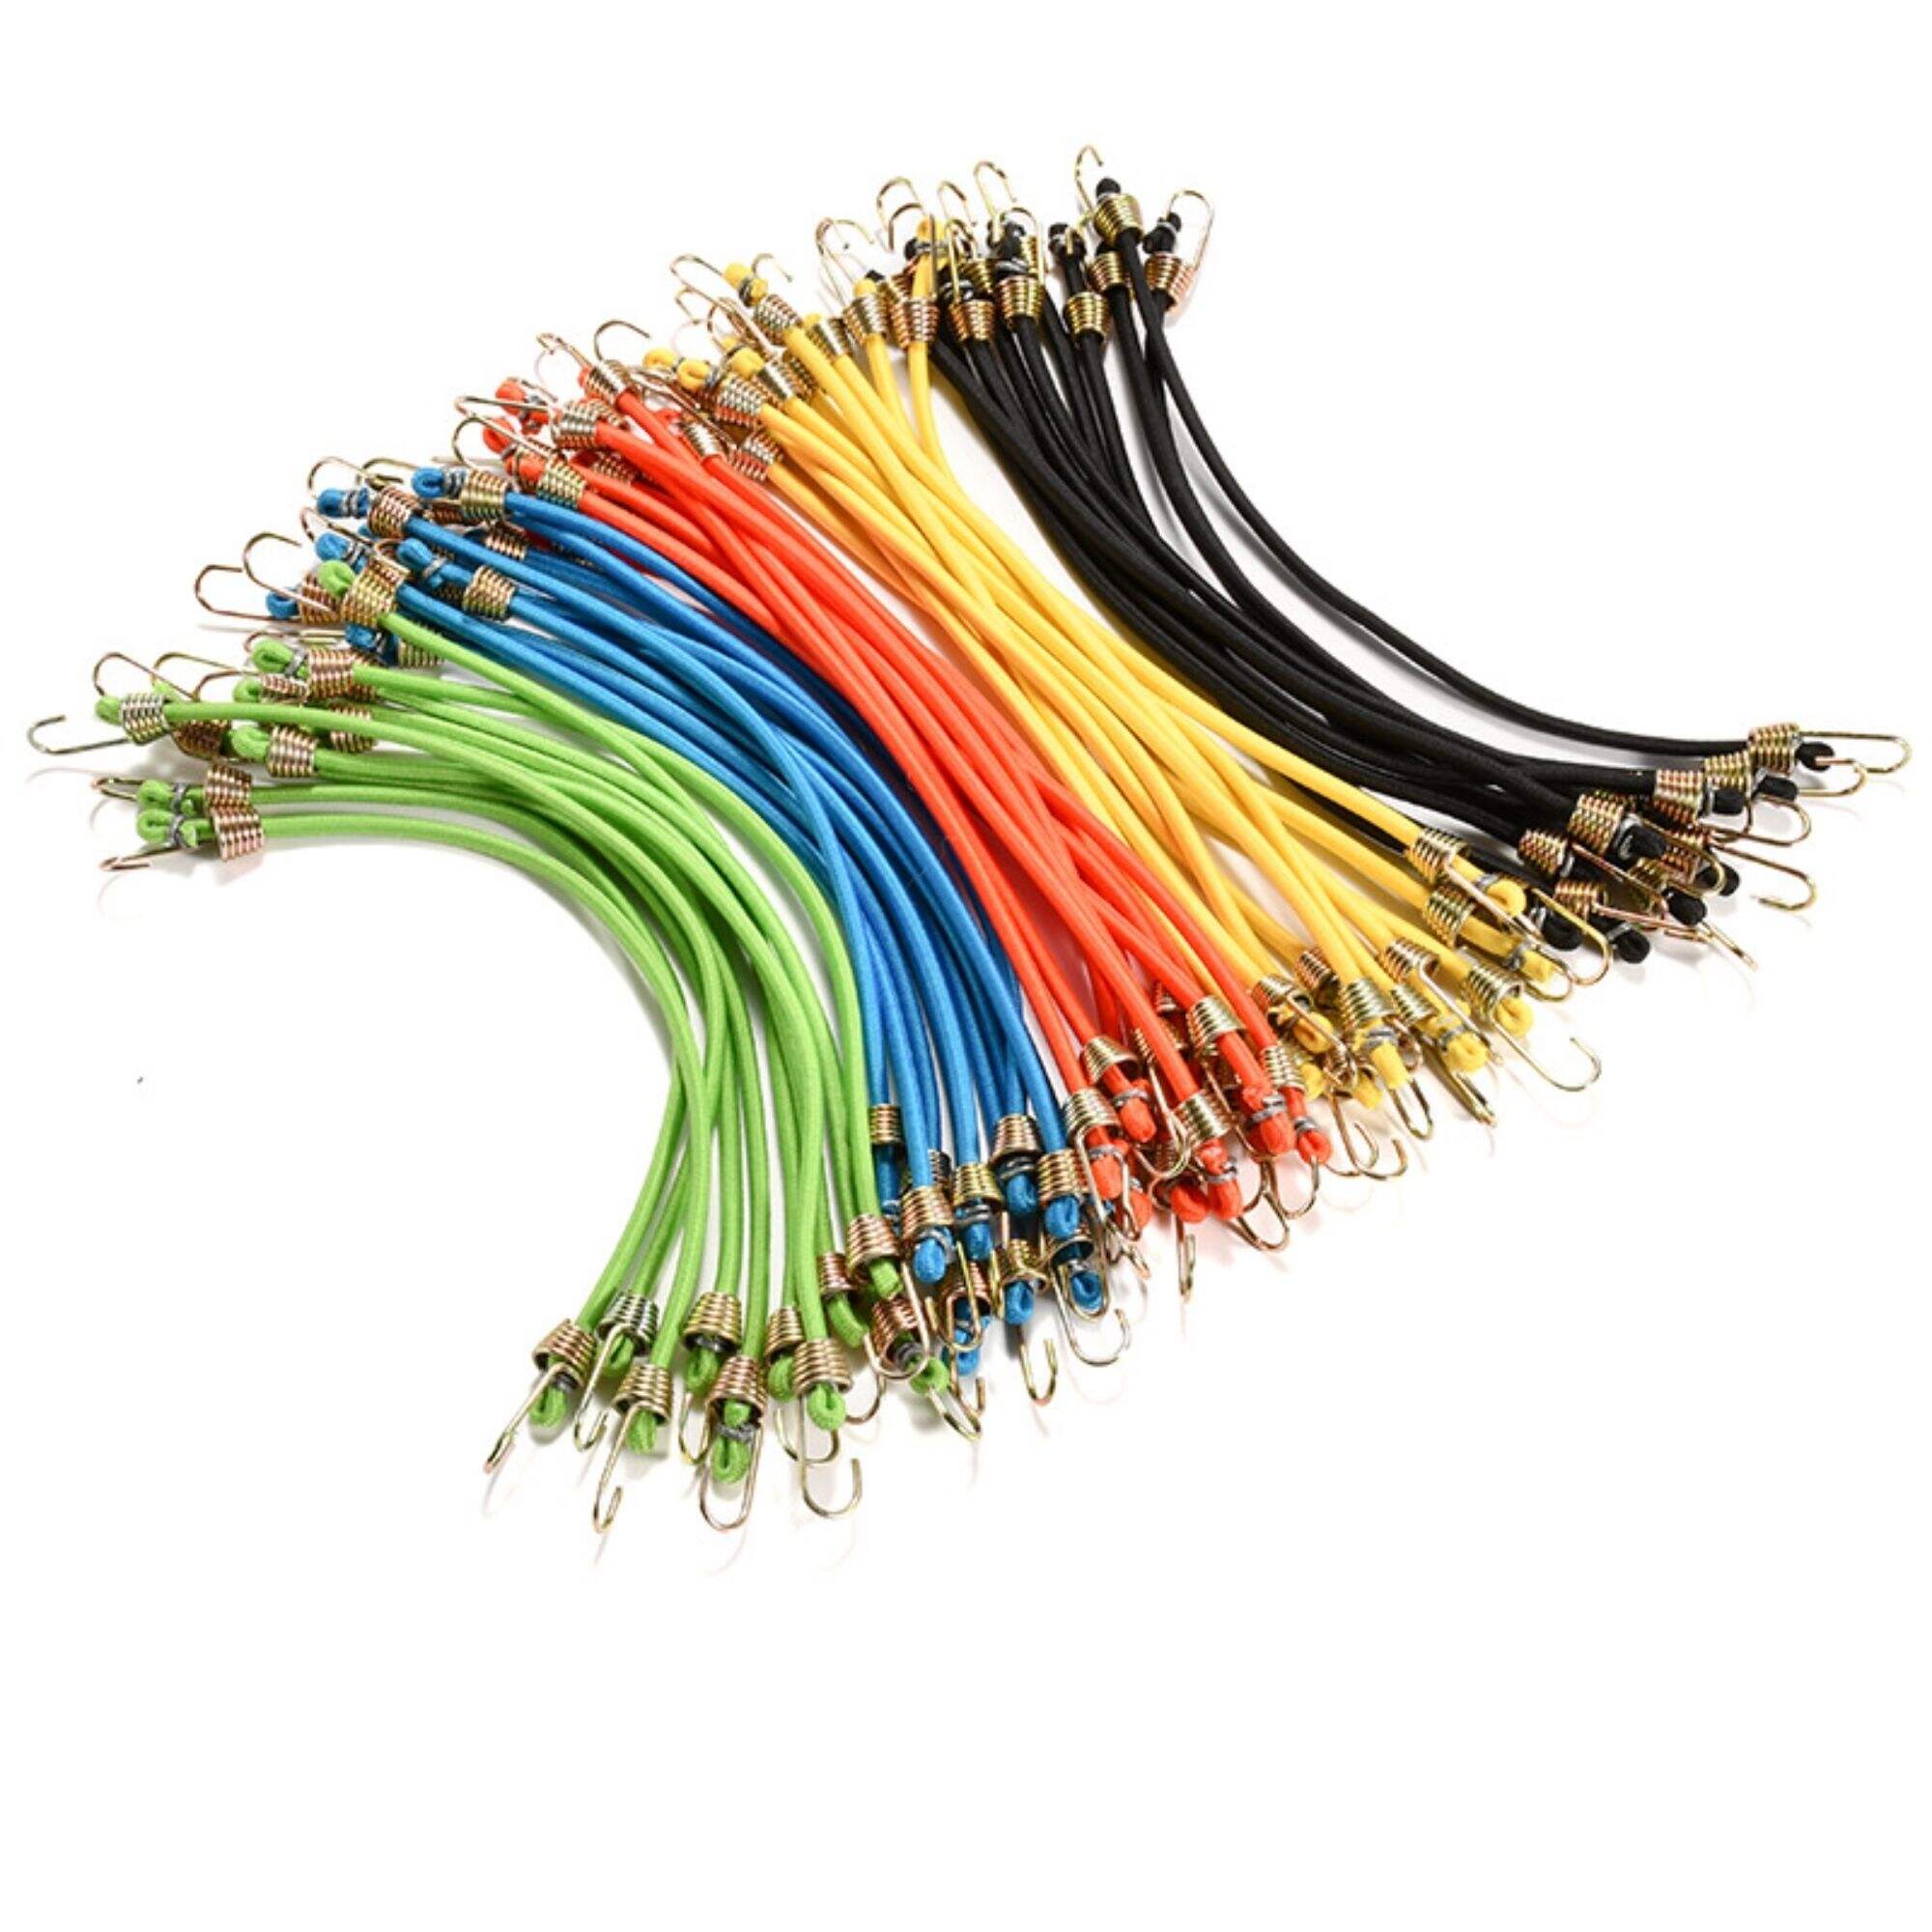 10 inches Rubber Stretchy Bungee Cords with Hooks for Bikes, Camping, Tools, Tarps and Cargo, Hang Christmas Ornaments